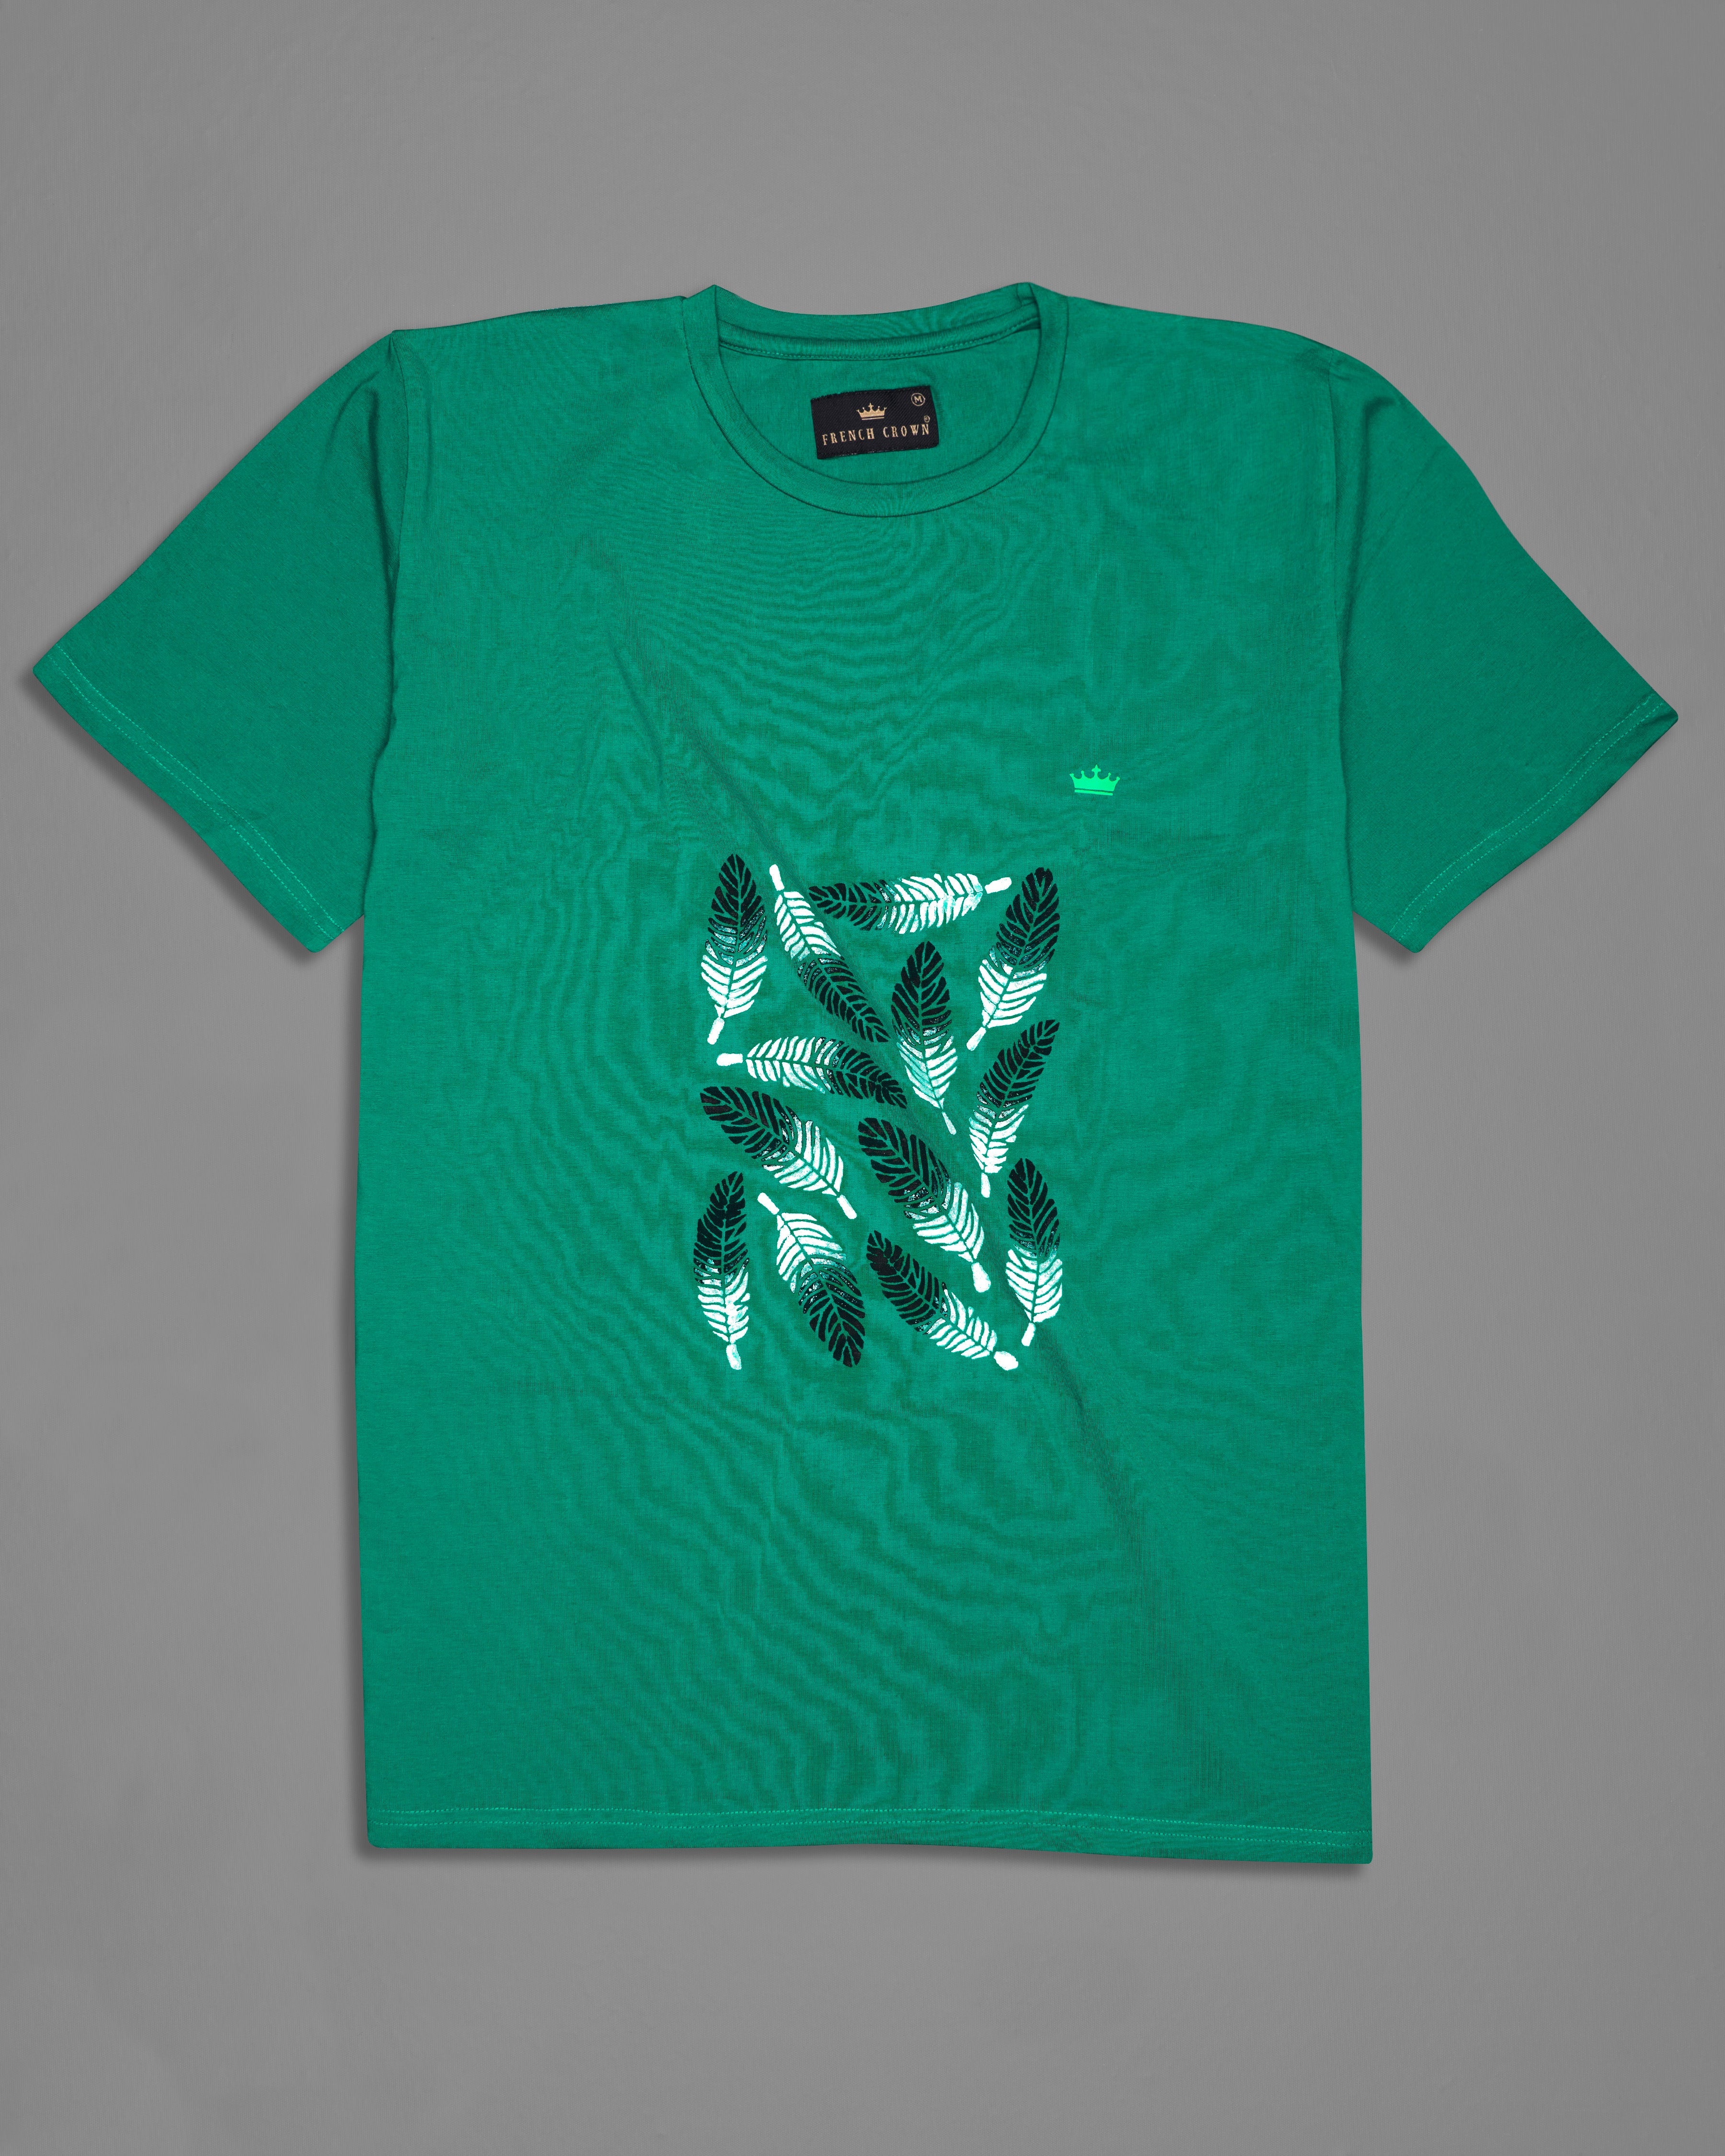 Tropical Green with Leaves Hand Painted Premium Cotton T-shirt TS005-W008-S, TS005-W008-M, TS005-W008-L, TS005-W008-XL, TS005-W008-XXL